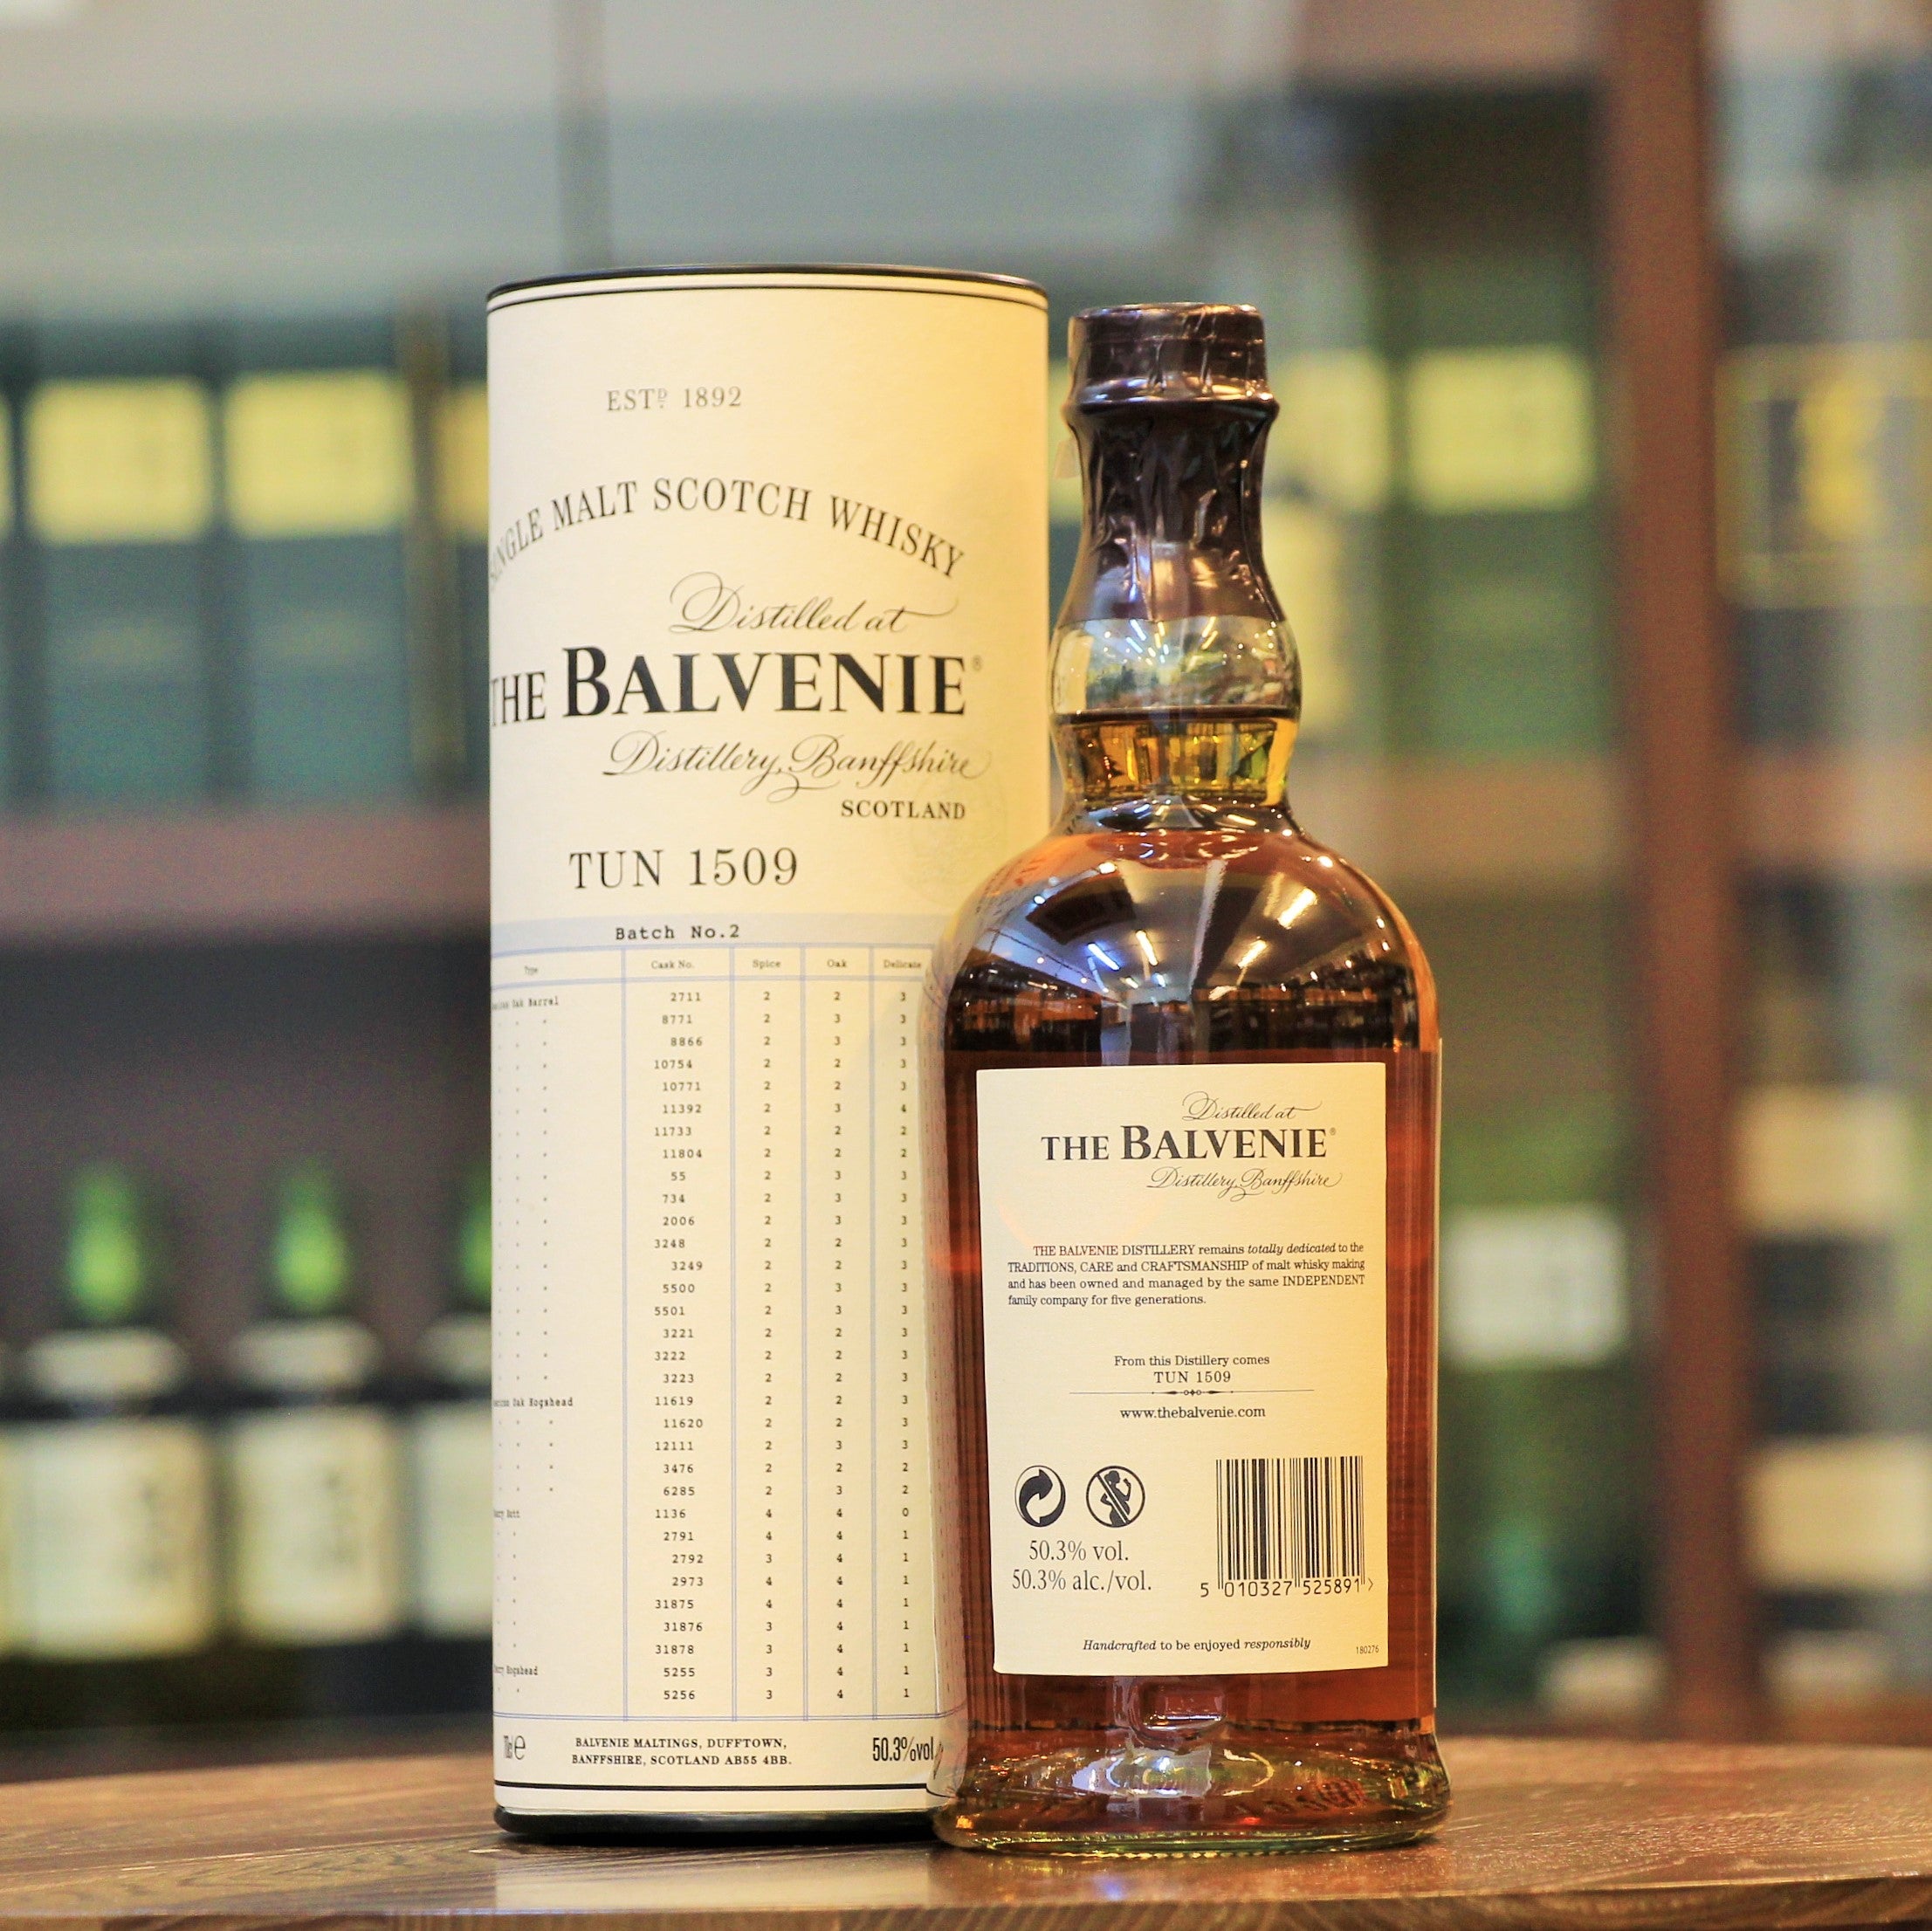 TUN 1509 is one of Balvenie's tradtional oak vatting/marrying vessels with a capacity of 8000L. The size of these TUNs allowed Malt Master David C. Stewart MBE (with over 50 years of experience) and who possesses an unequalled knowledge of The Balvenie to hand-select a variety of vintage casks and marry them in Tun 1509, housed in Warehouse 24. Three months of vatting then results in this exceptionally complex and rare single malt Scotch whisky, rated 5 Stars (90 points) by Whiskyfun.